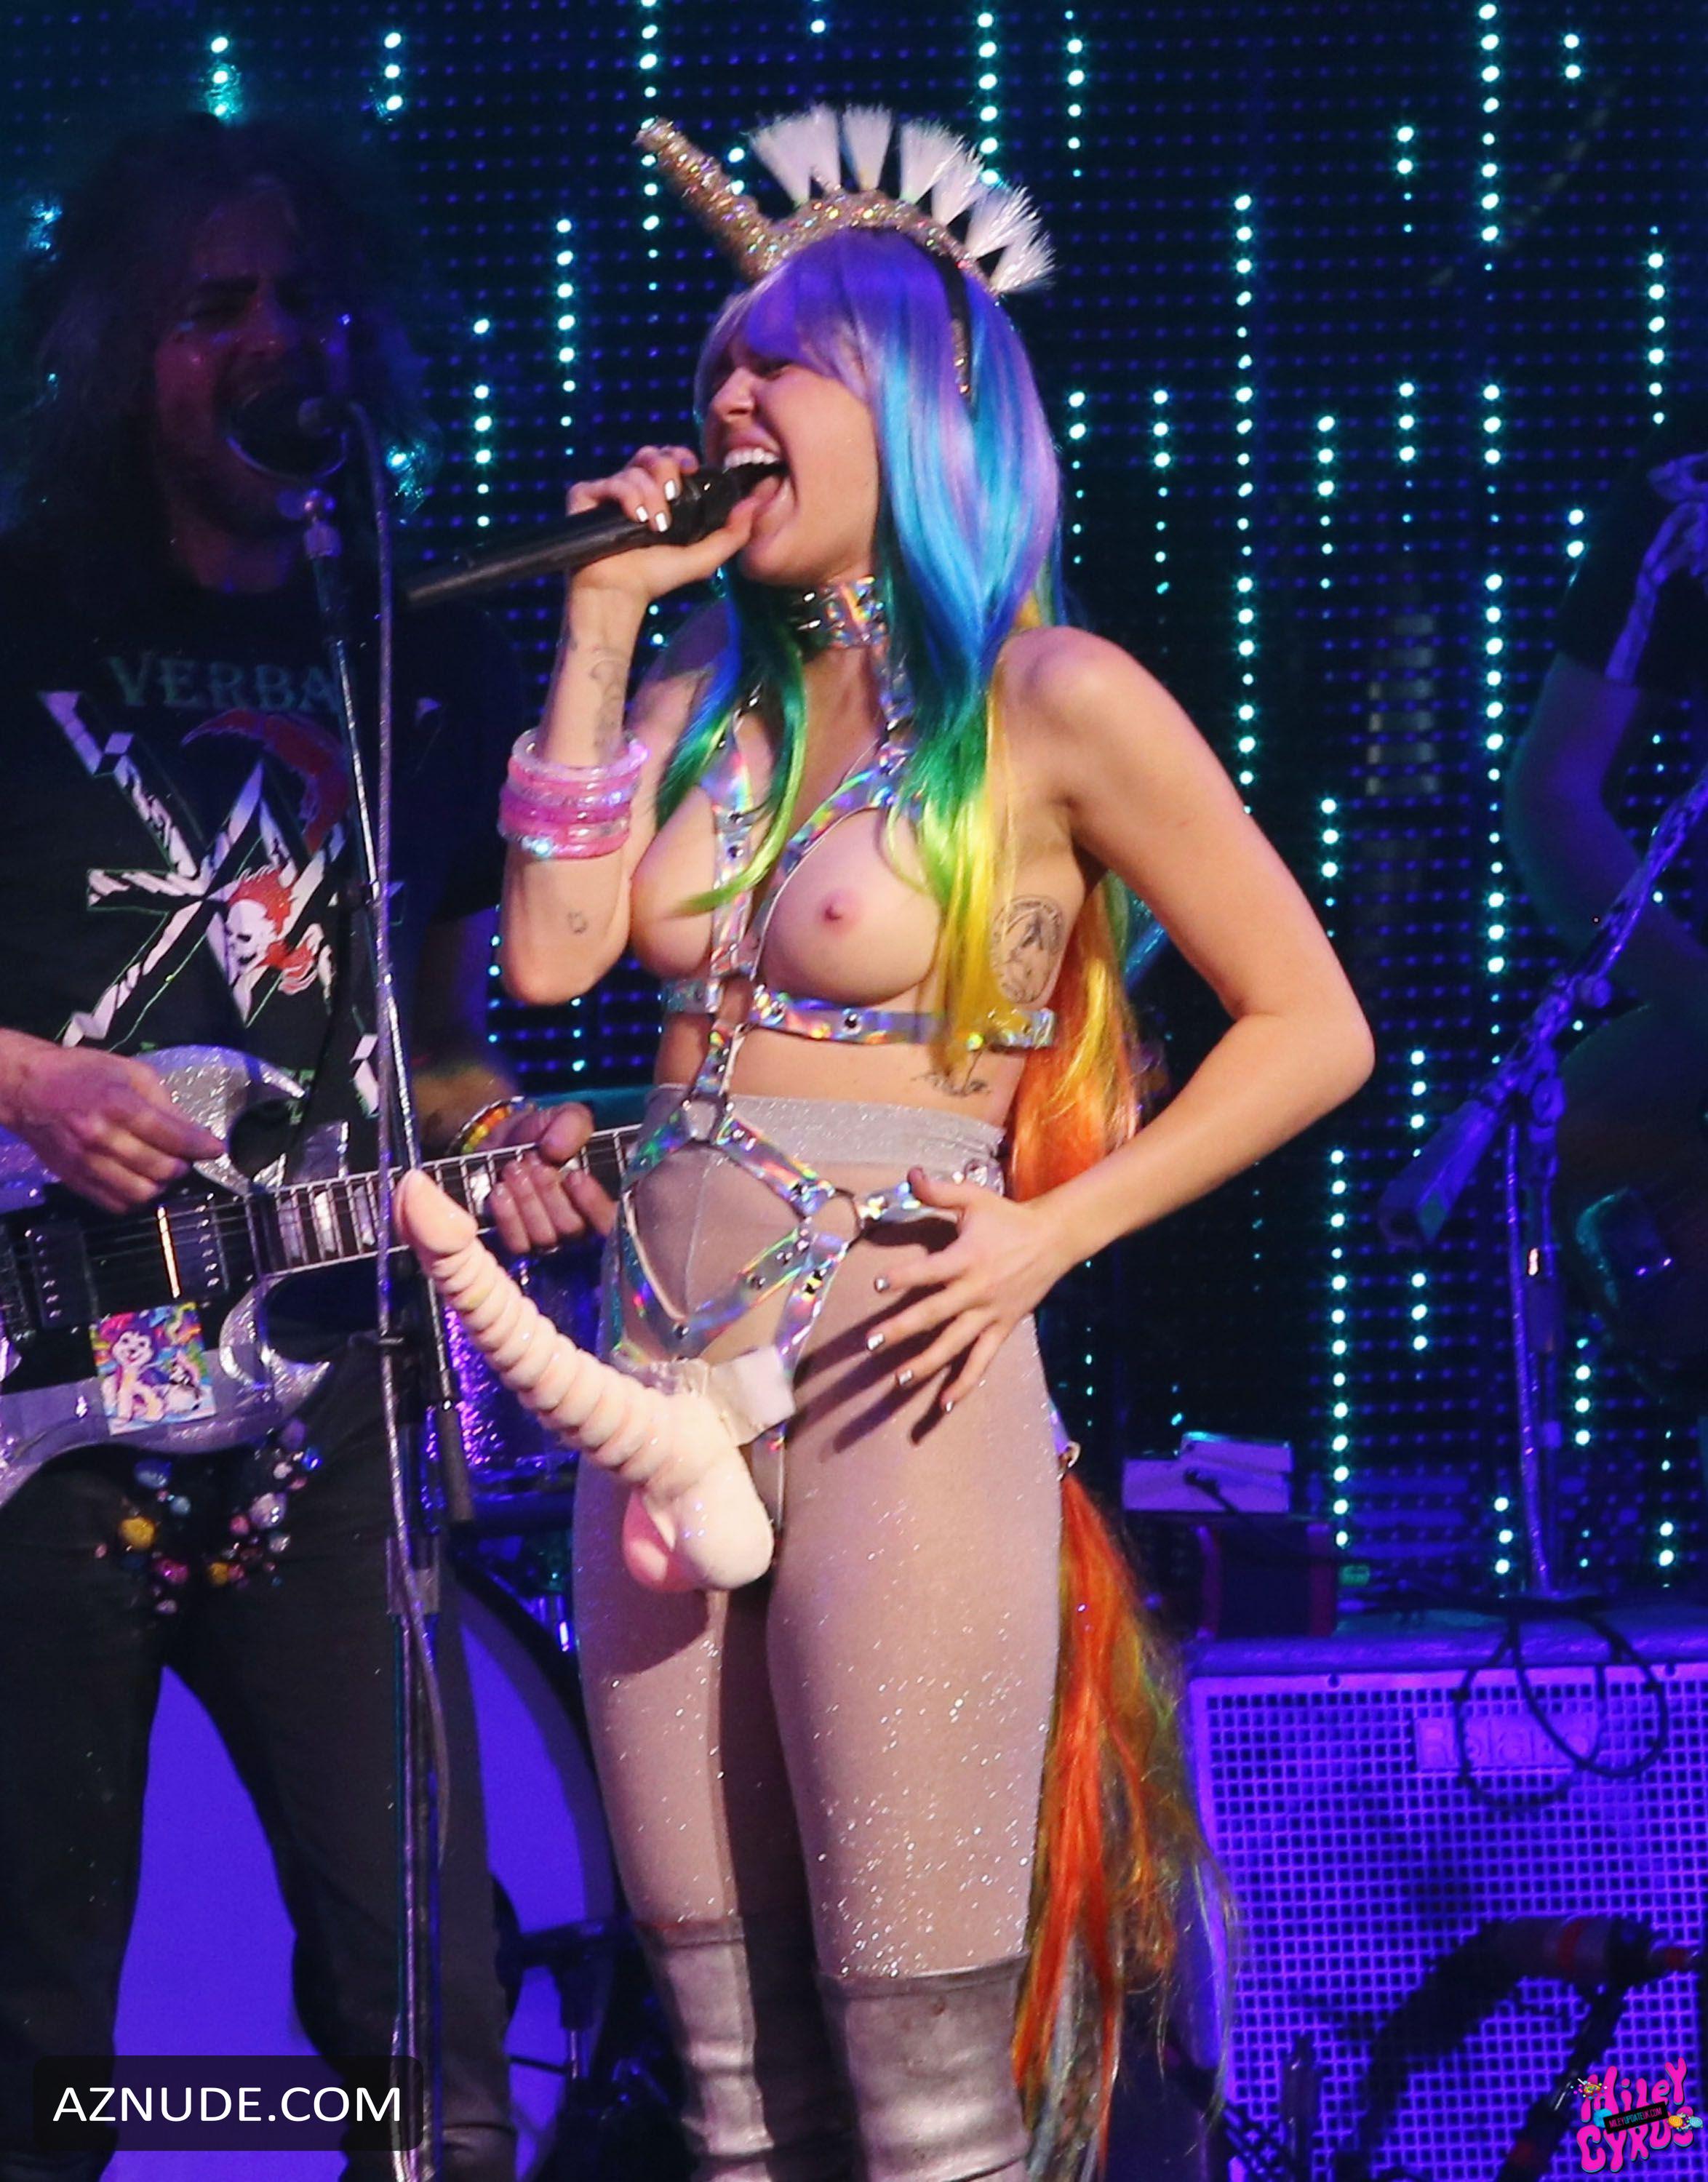 Tits Miley Cyrus Nude In Concert Pic